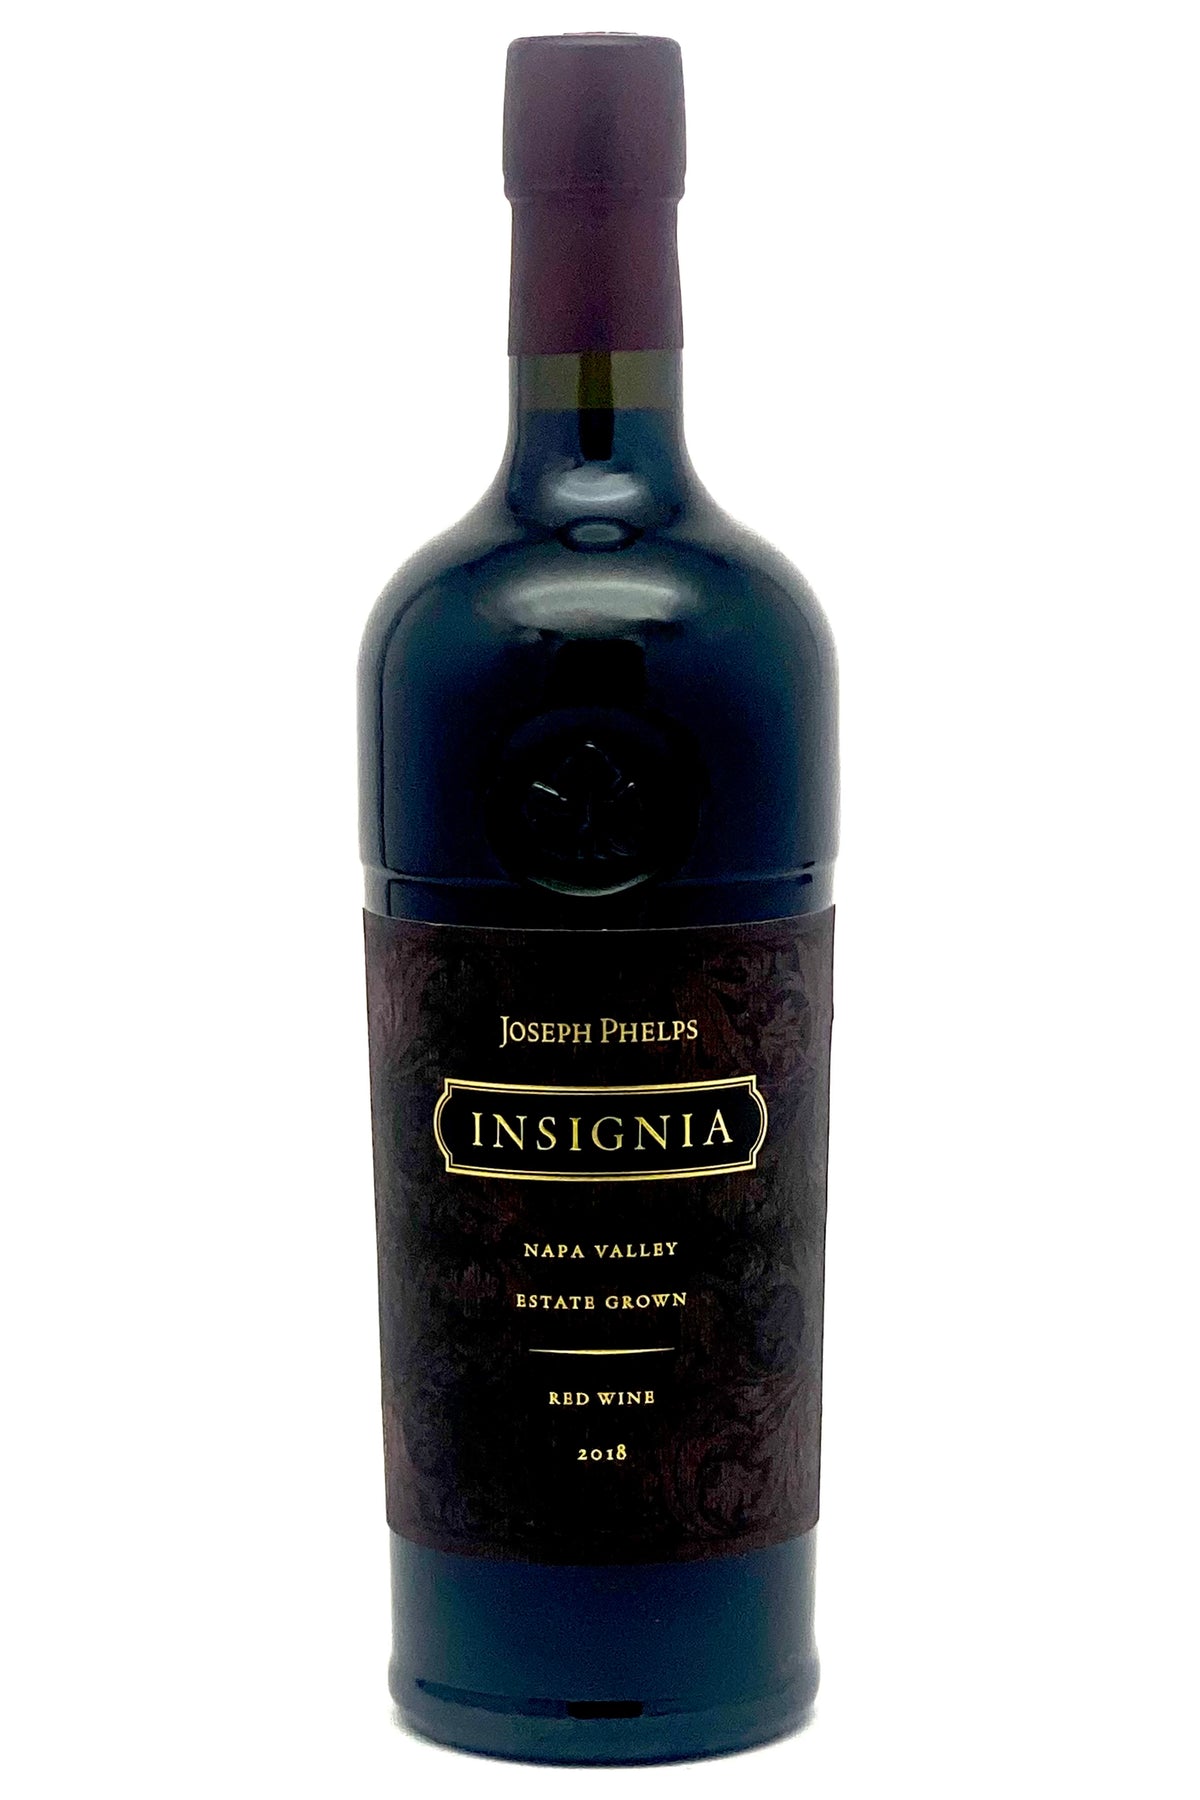 Phelps 2018 Insignia Estate Grown Red Wine from Napa Valley